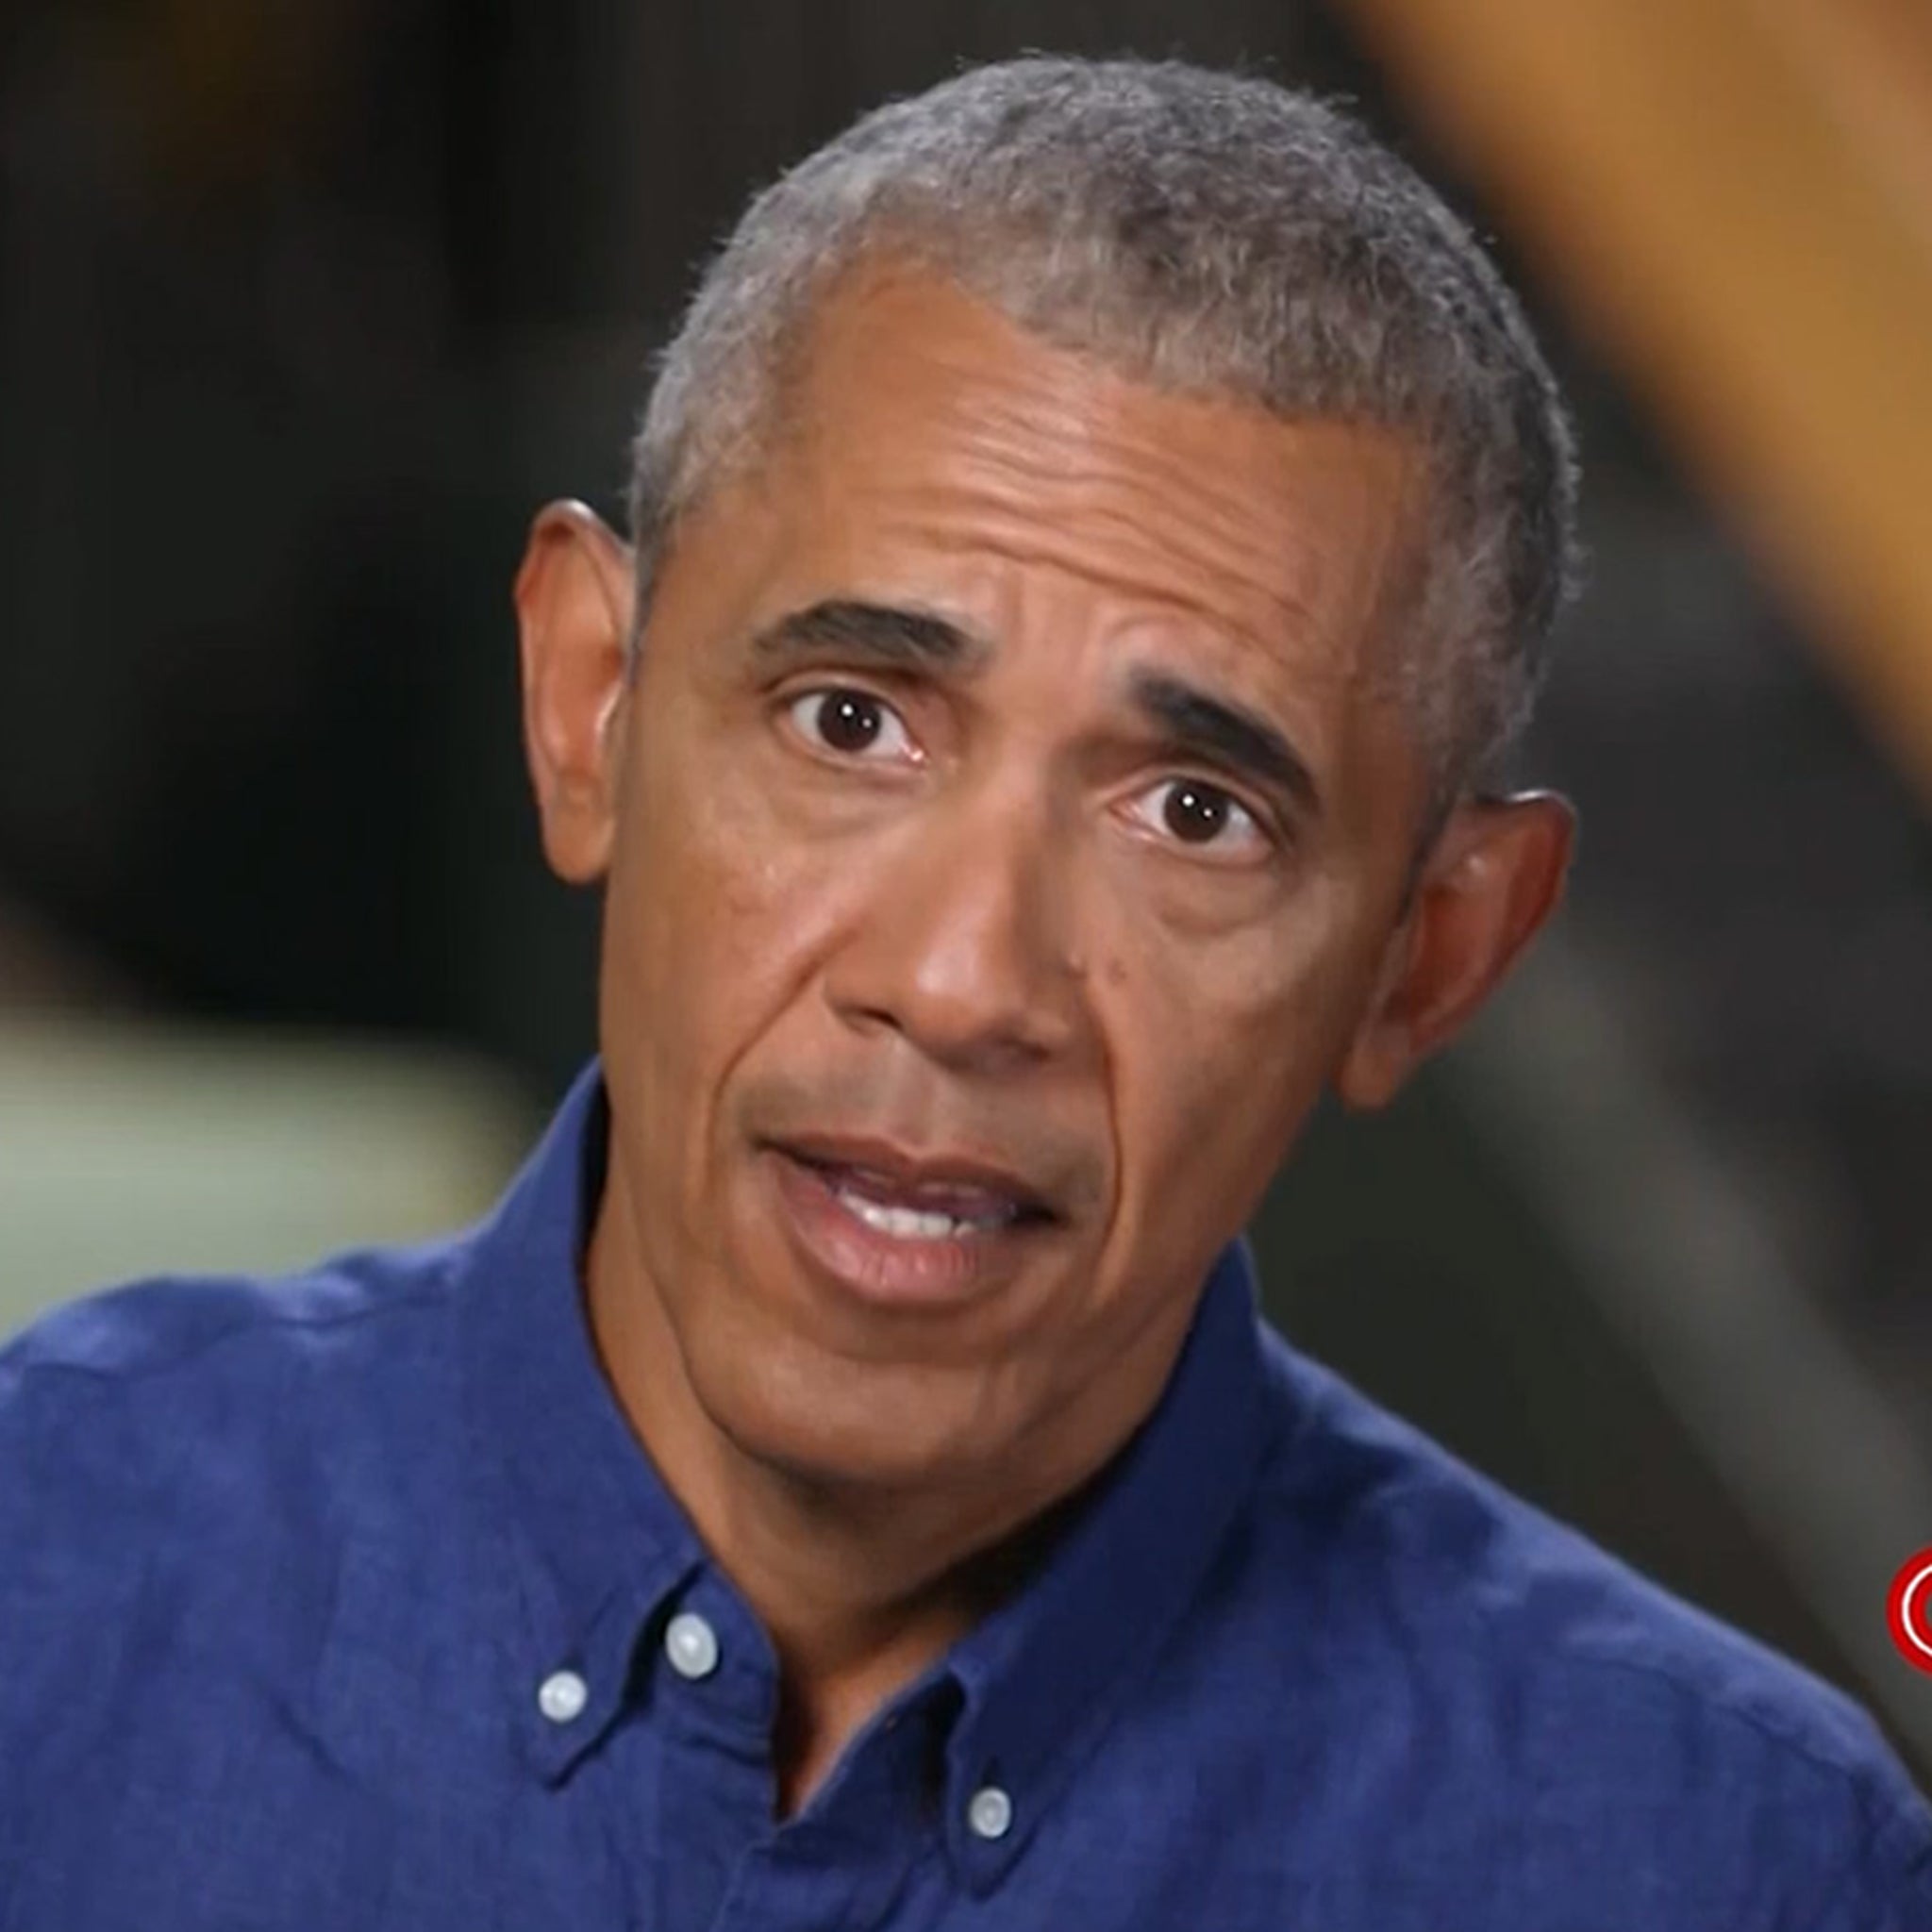 Obama Says Cancel Culture is Dangerous, but Daughters' Generation Gets It